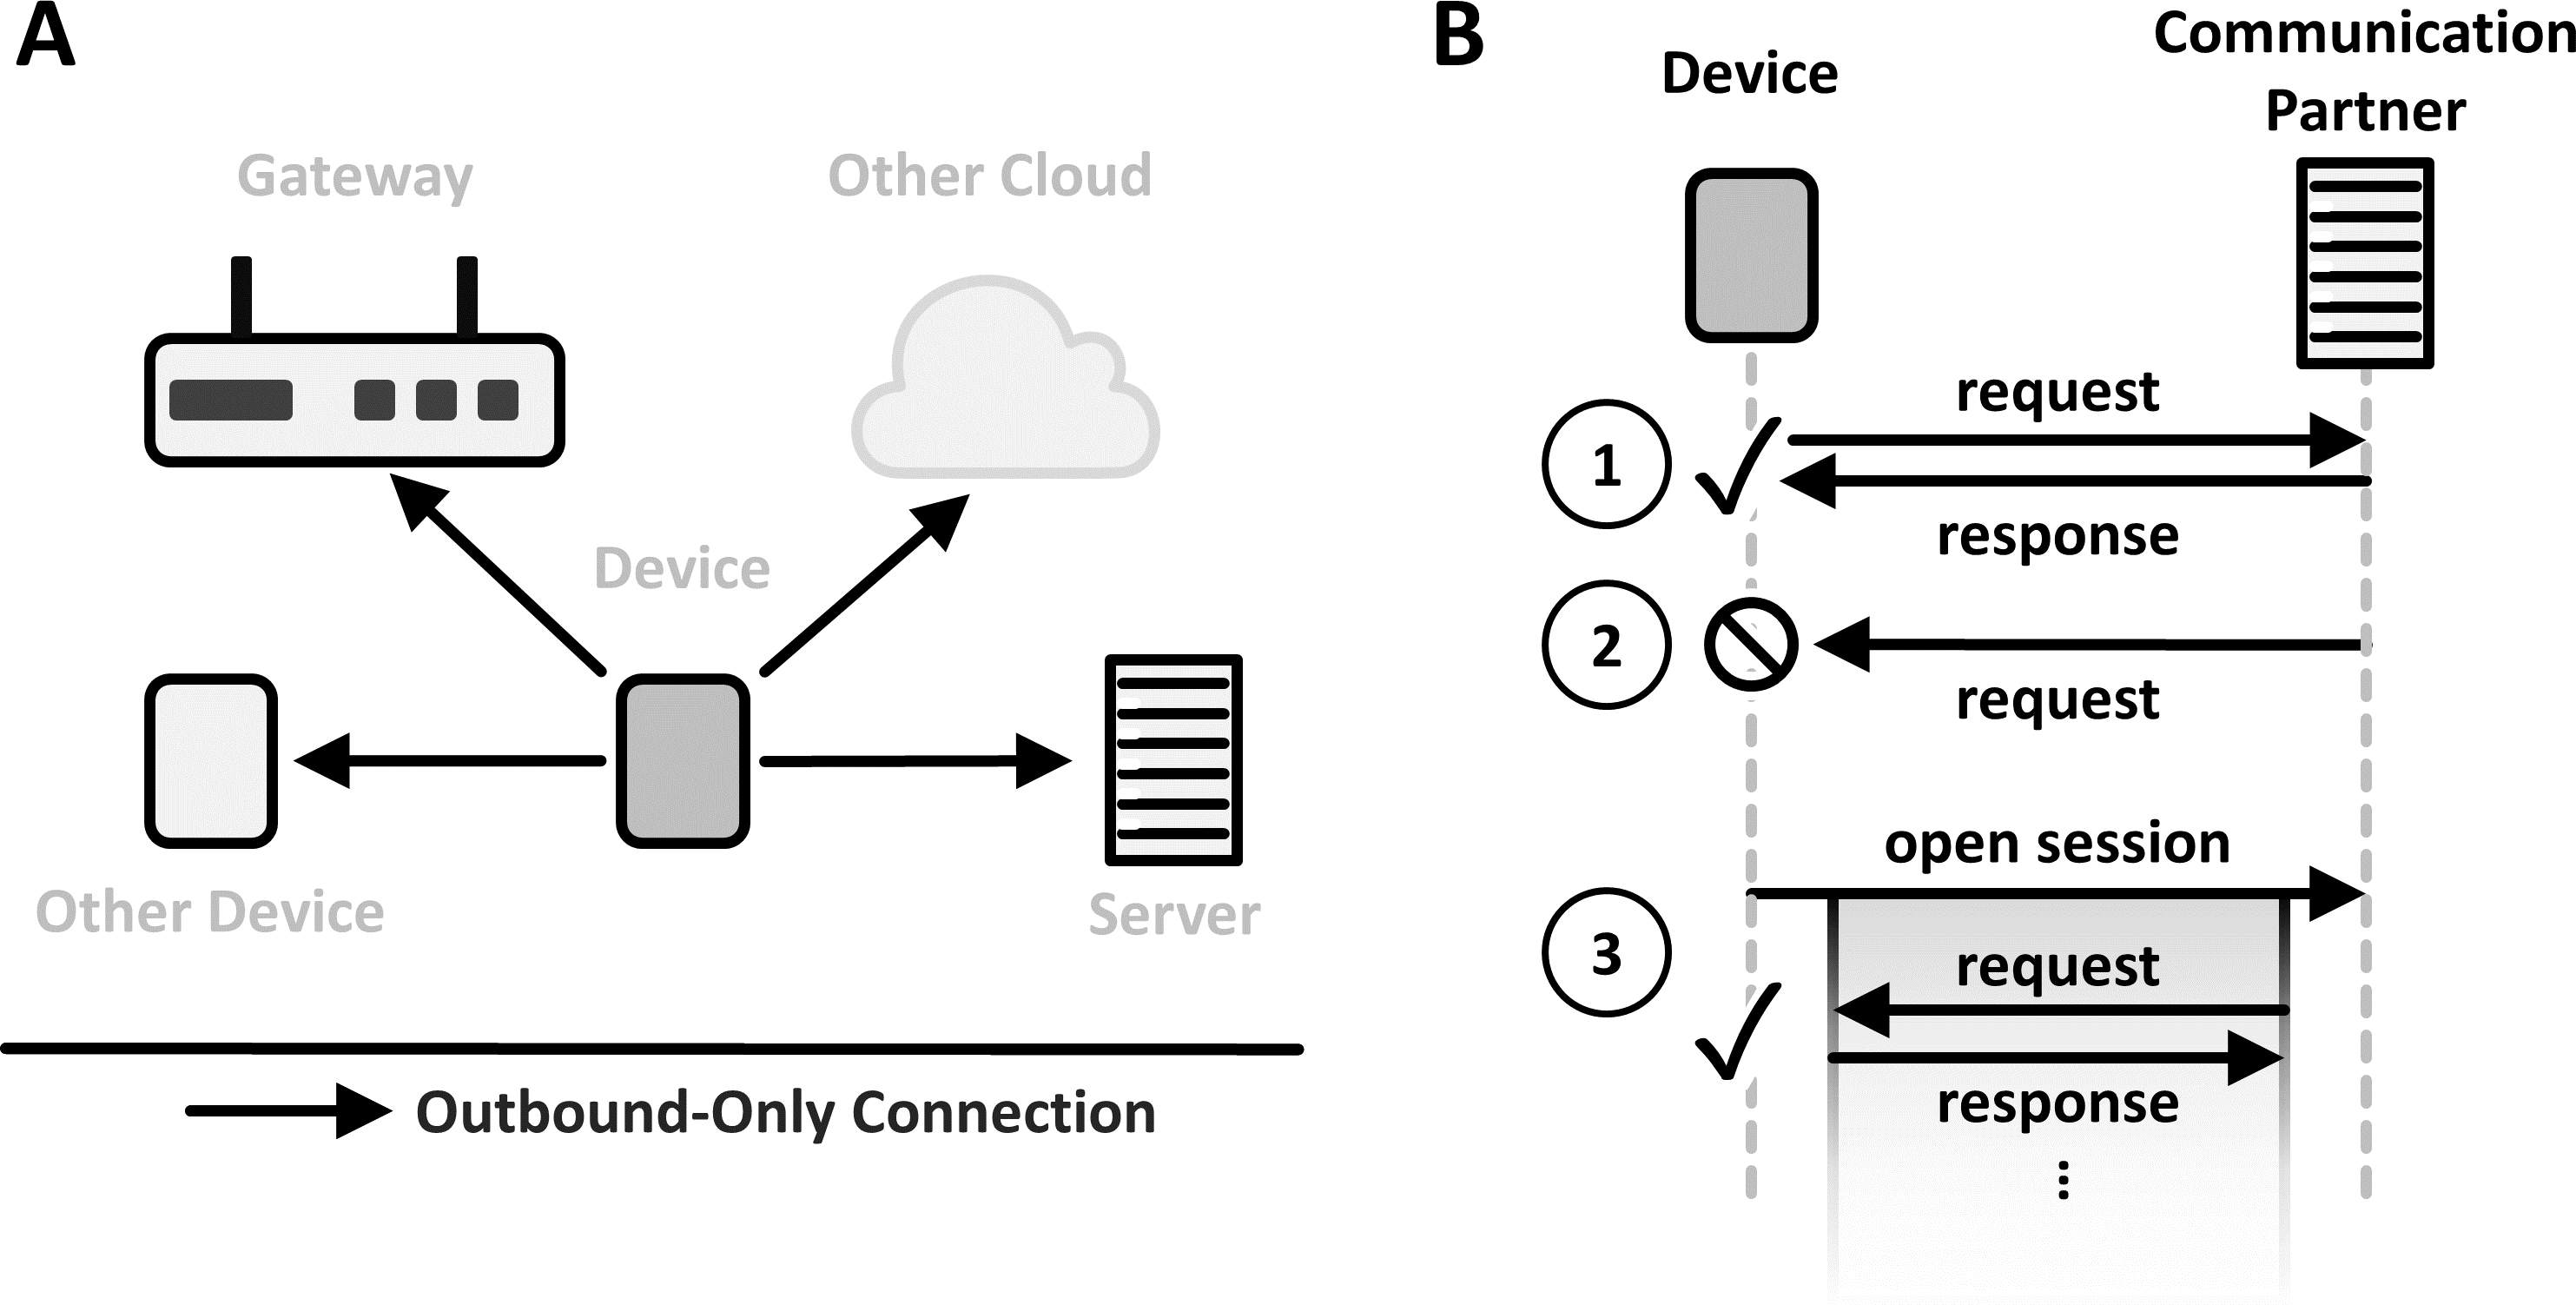 Solution sketch of the Outbound-Only Connection pattern